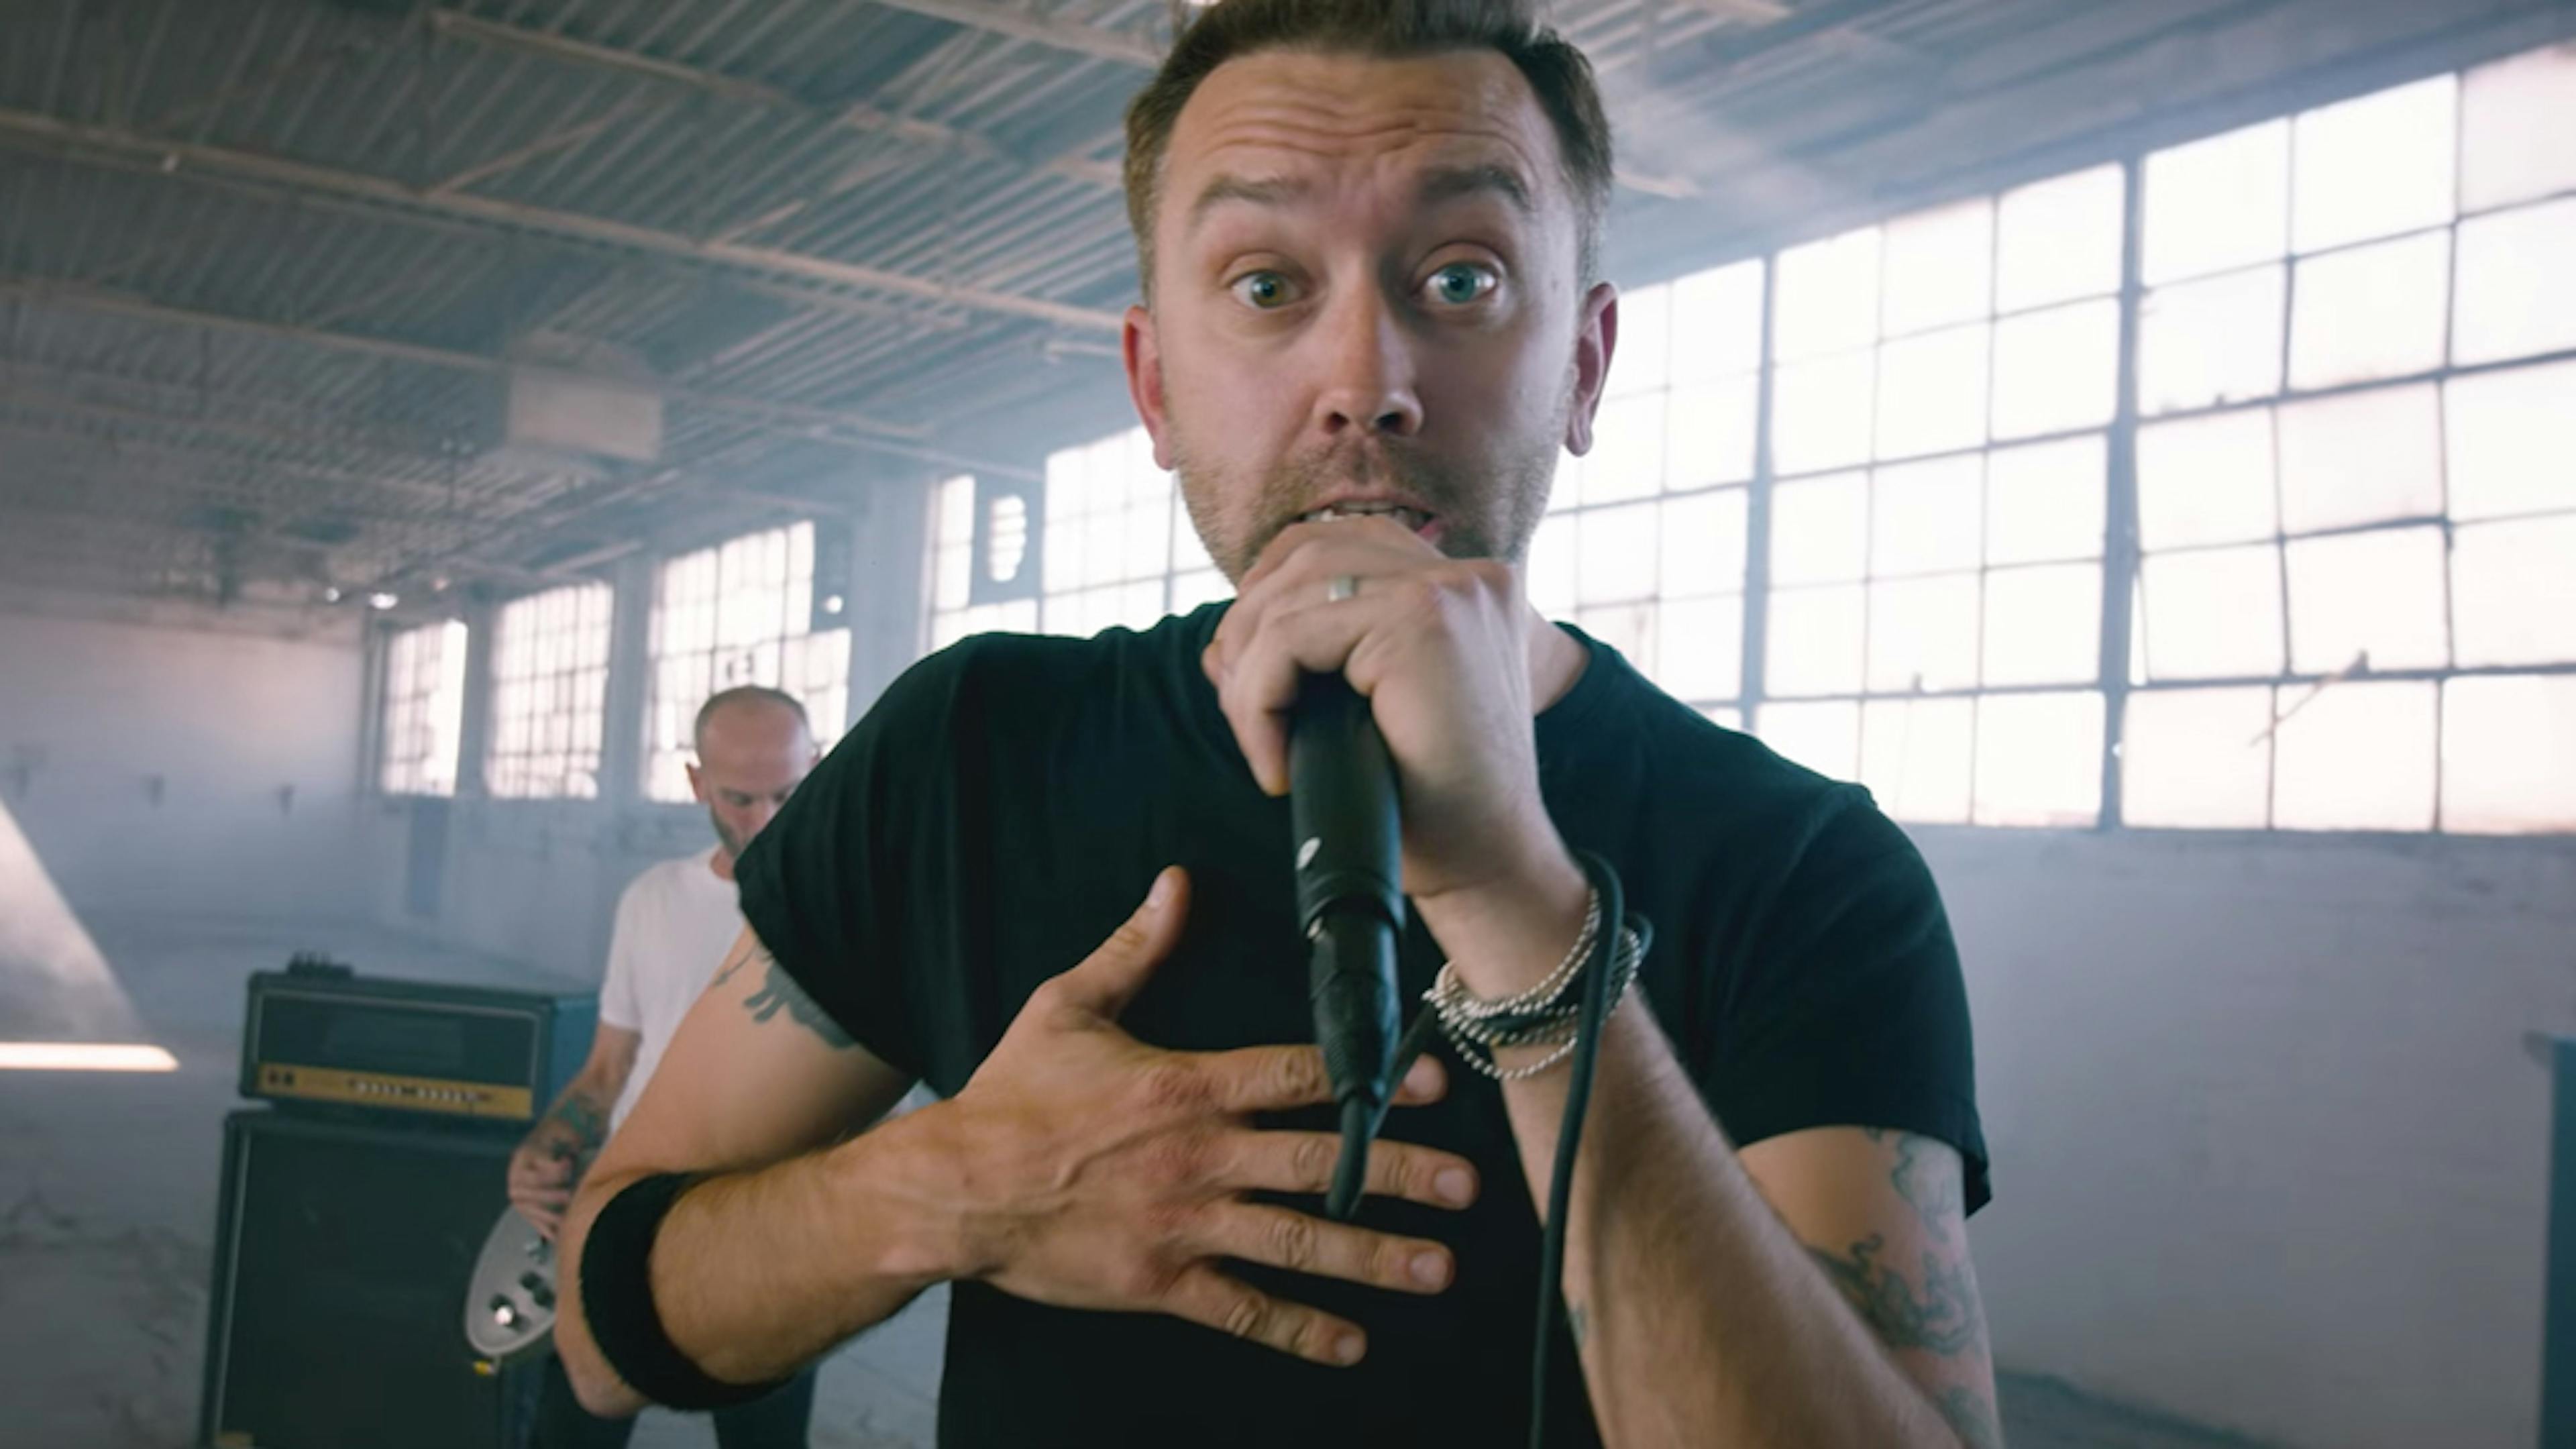 Rise Against Drop Powerful Video For Megaphone